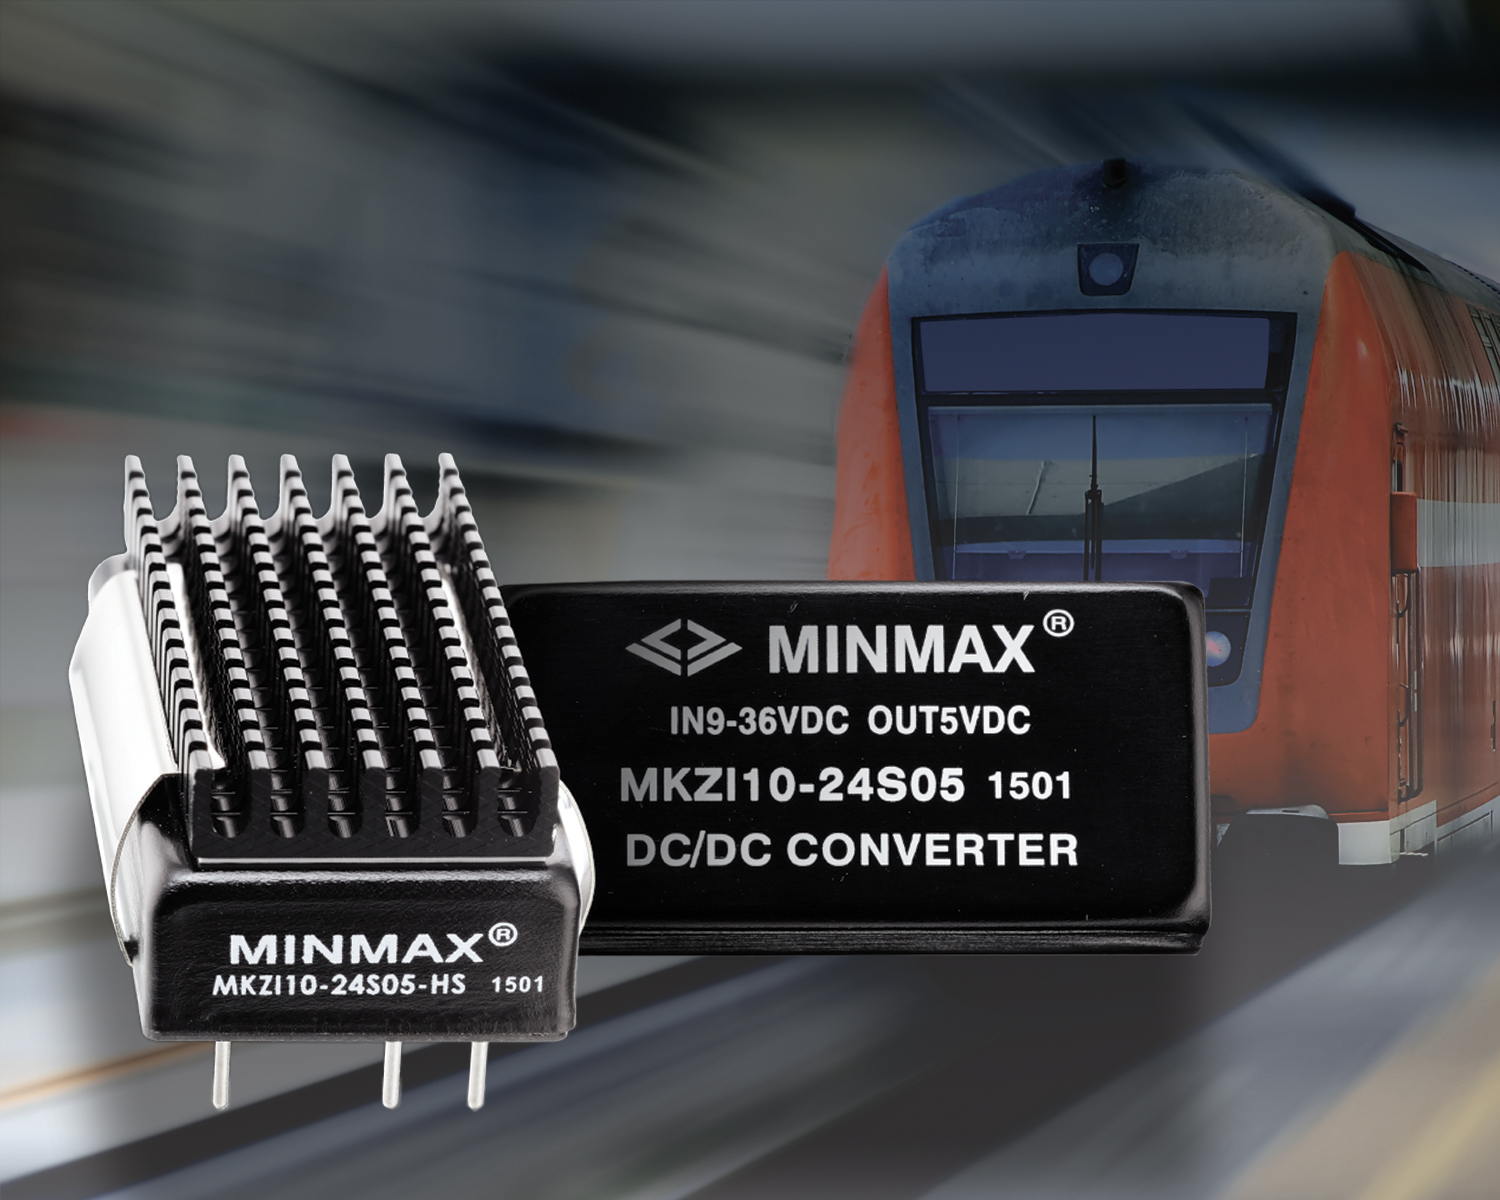 10 Watt Converters Intended for Railway Applications and Battery Powered Equipment